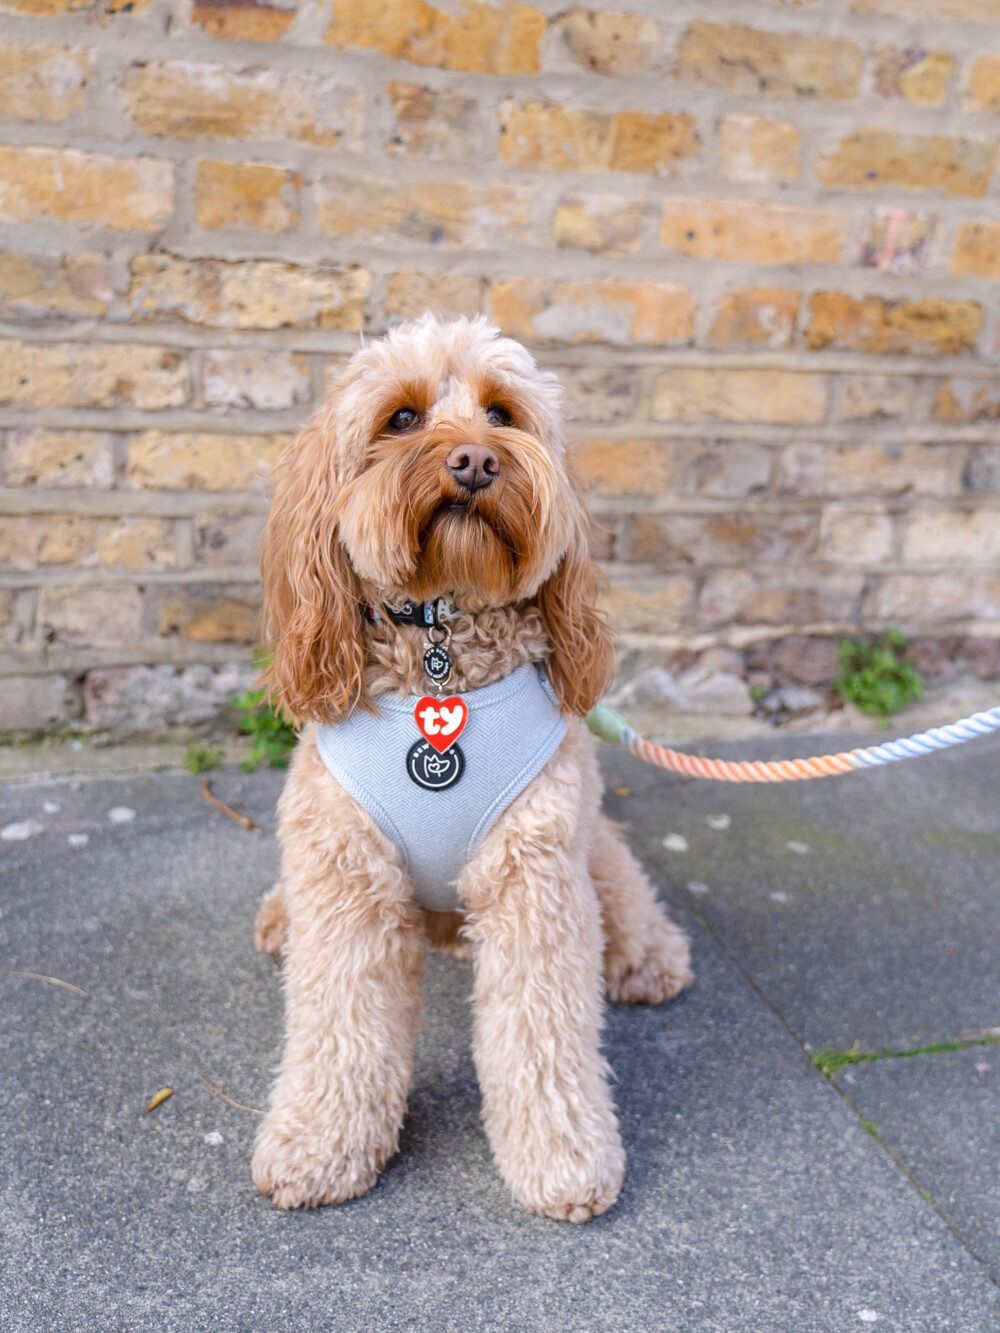 A fluffy dog in front of a brick wall wearing a harness, tag and with a rainbow lead